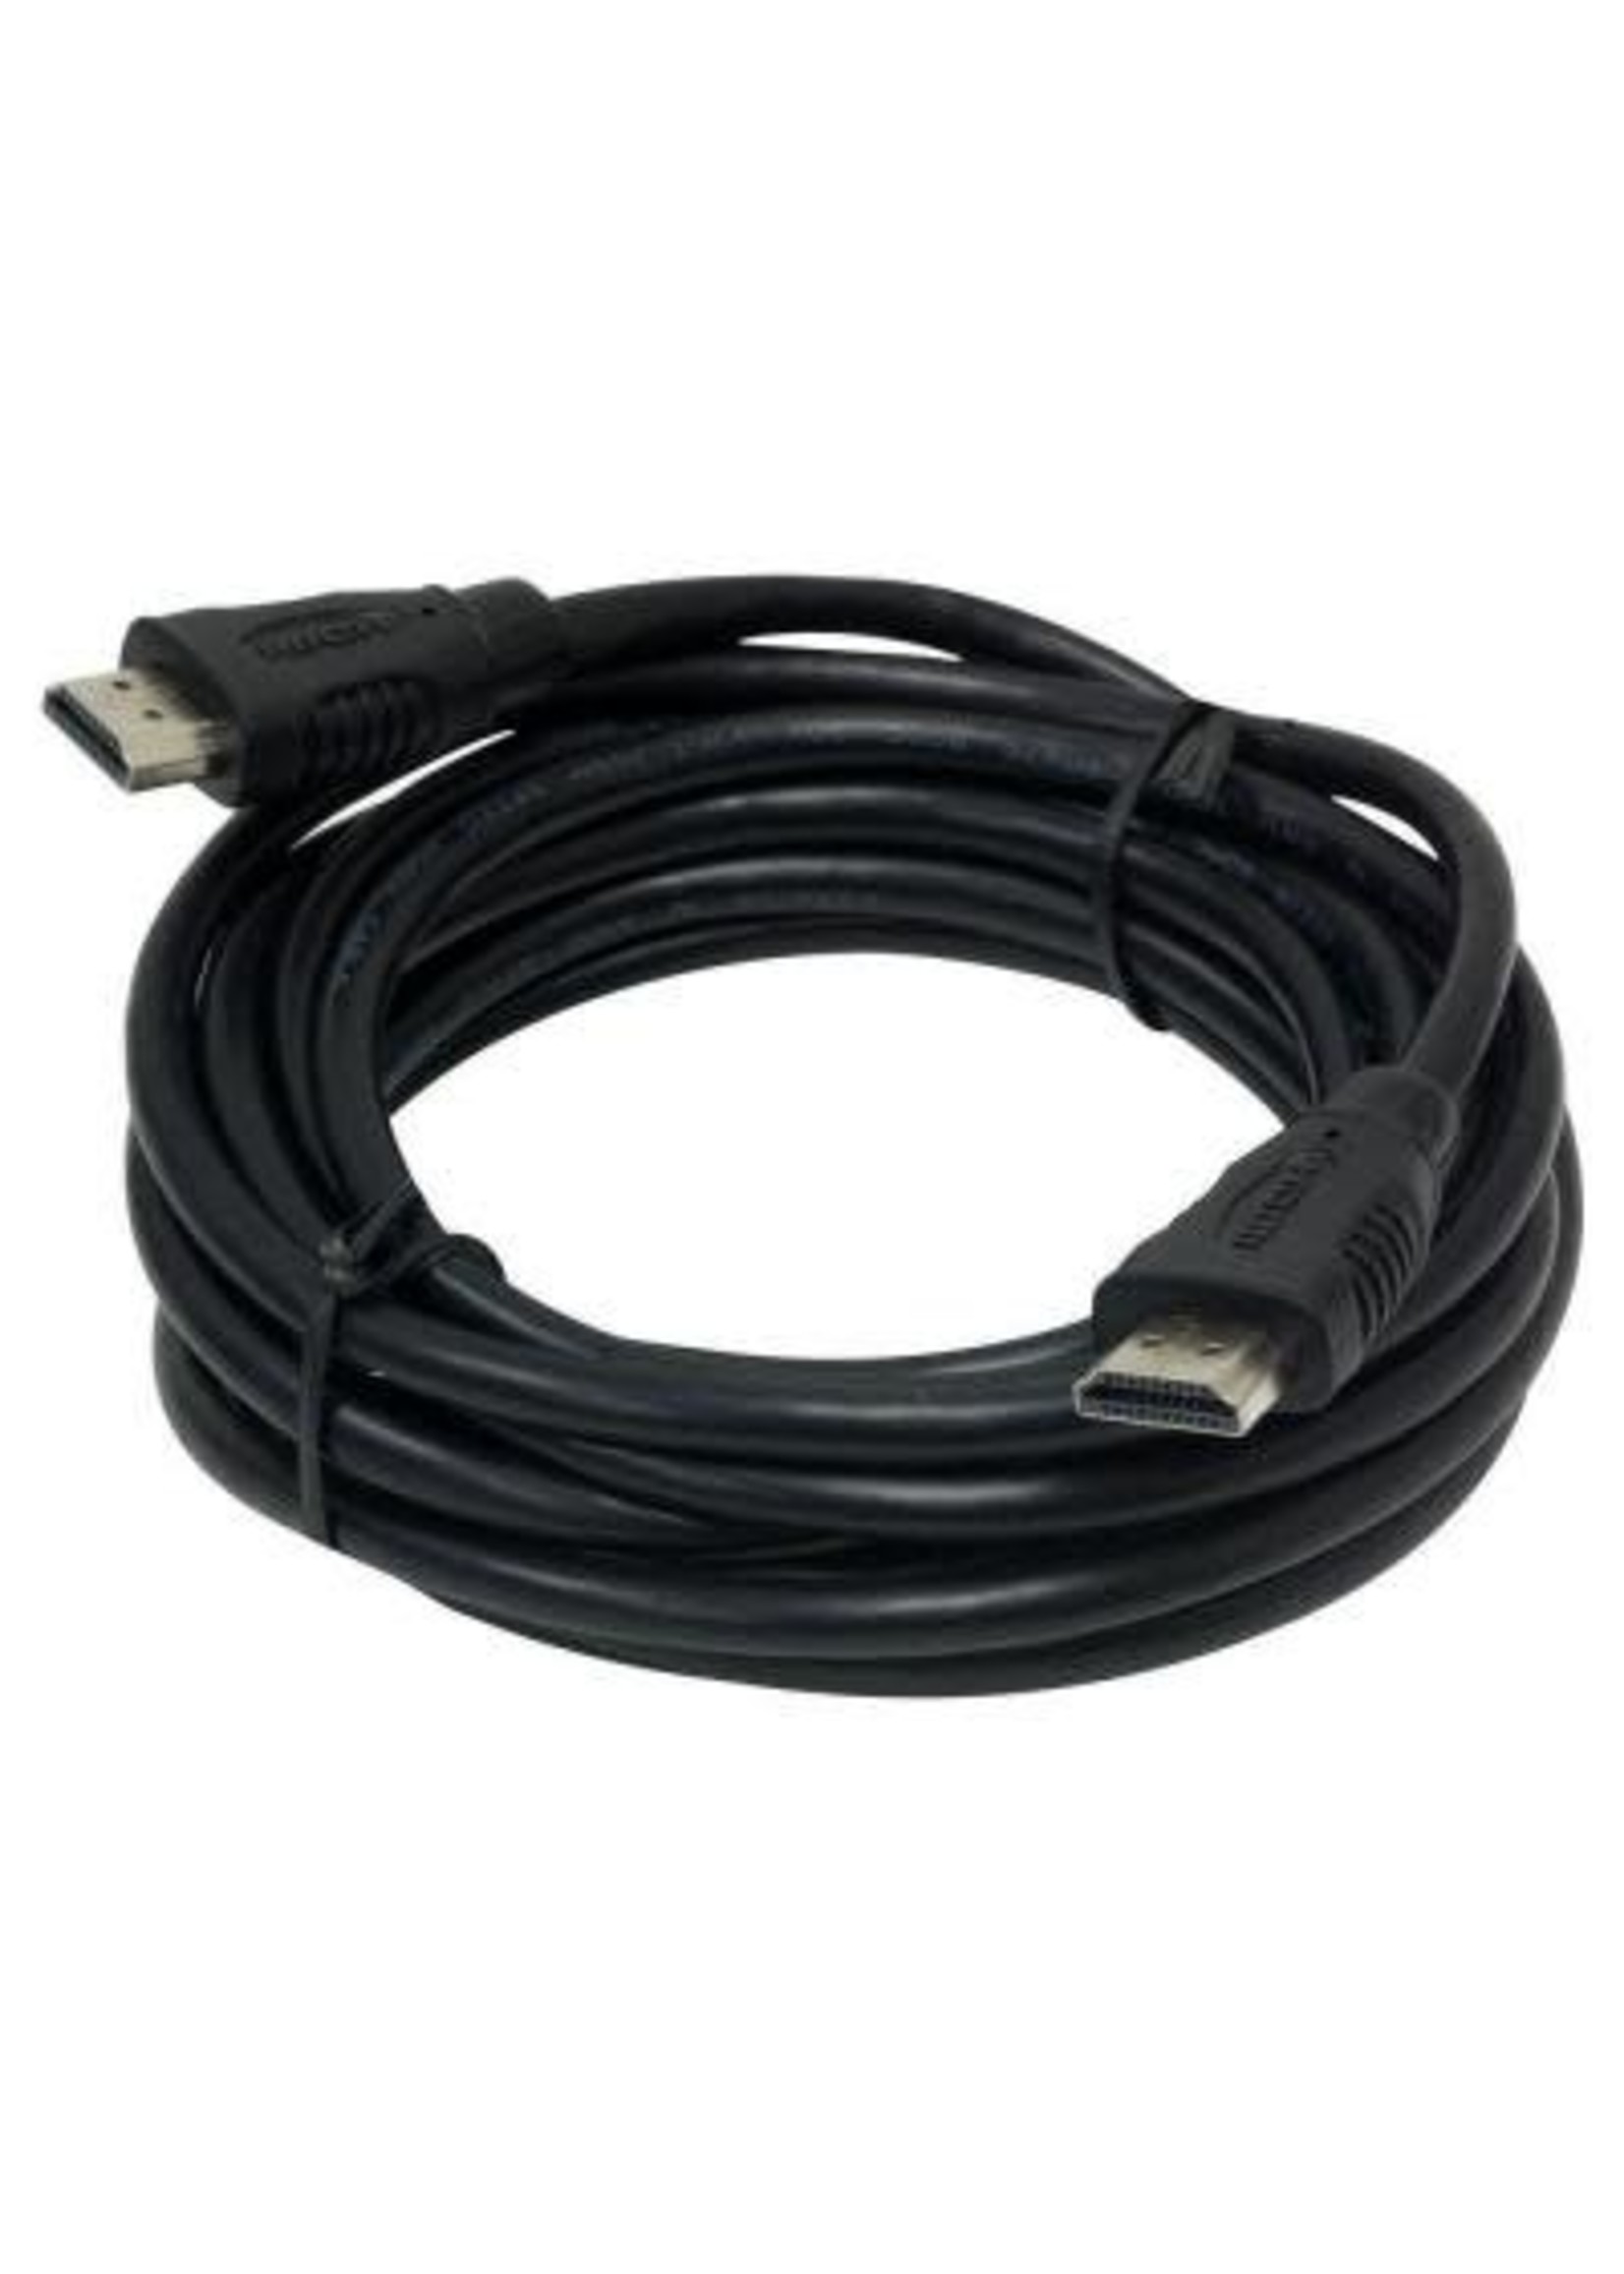 HDMI 2.0 High Speed 4K Braided Cable 6 ft